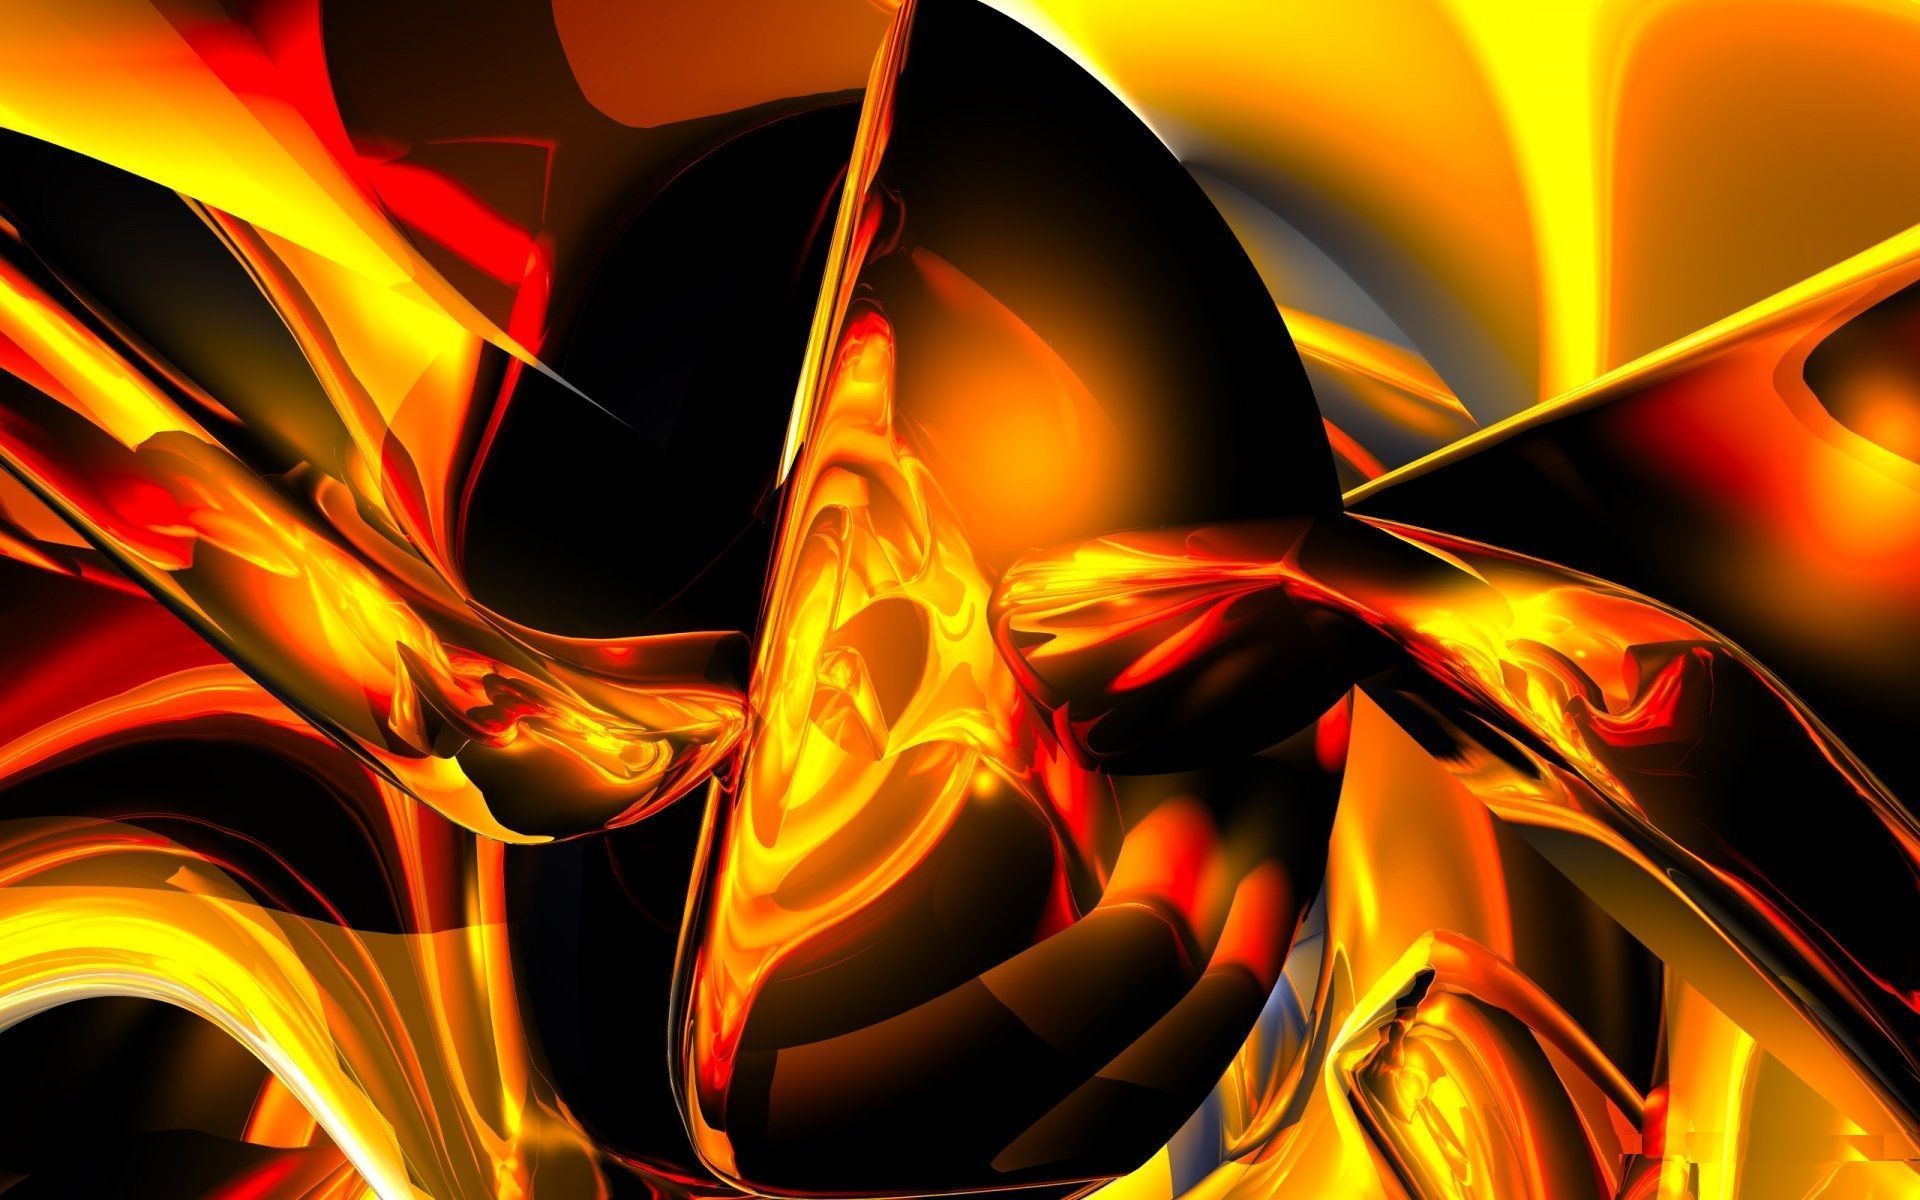 Colourful fire flame widescreen high resolution wallpaper for desktop background download free